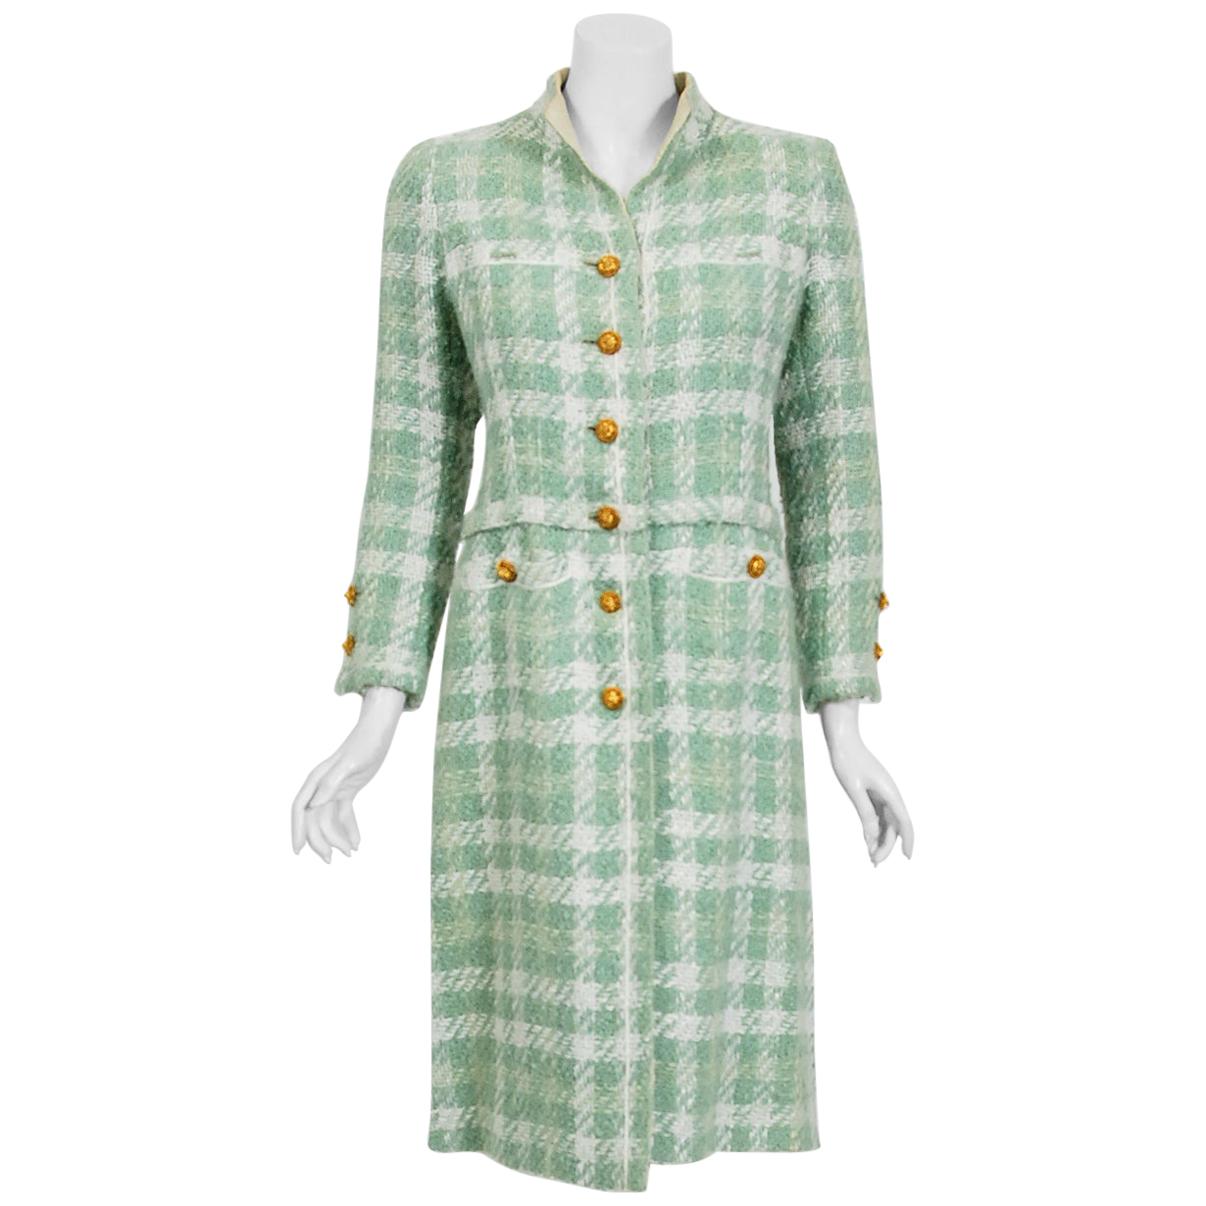 1973 Chanel Haute Couture Documented Seafoam Green Boucle Plaid Wool Coat 